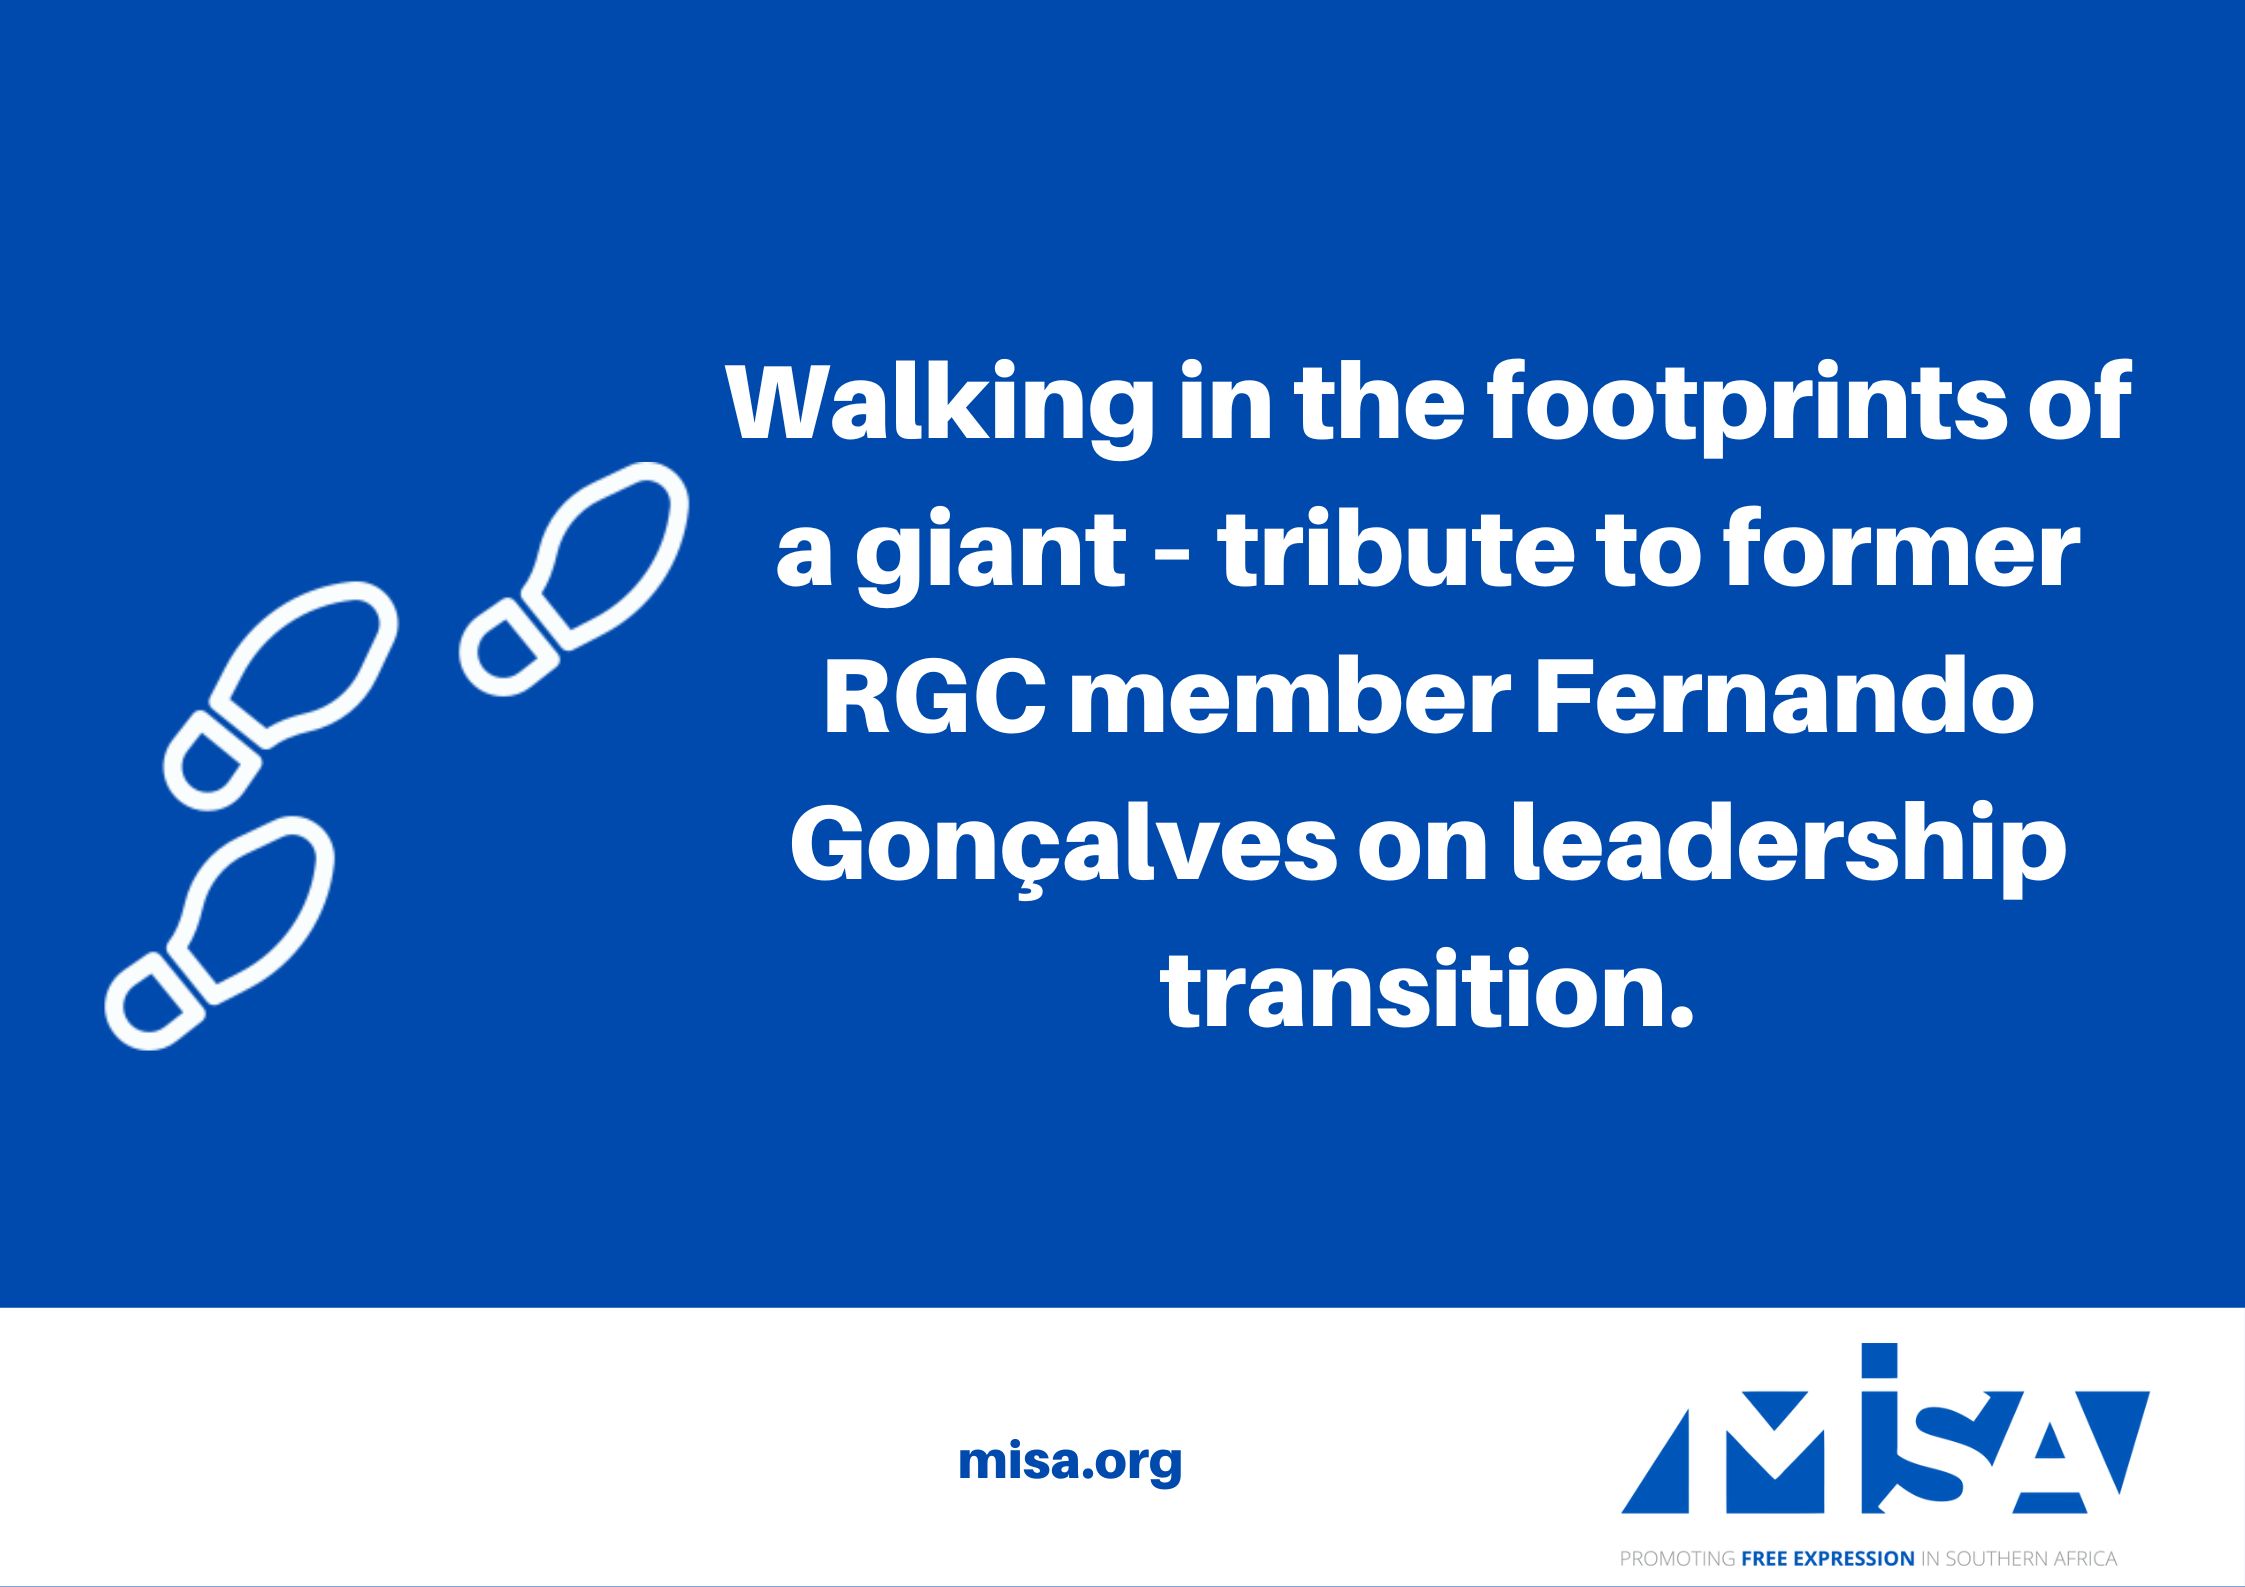 Walking in the footprints of a giant – tribute to former RGC member Fernando Gonçalves on leadership transition